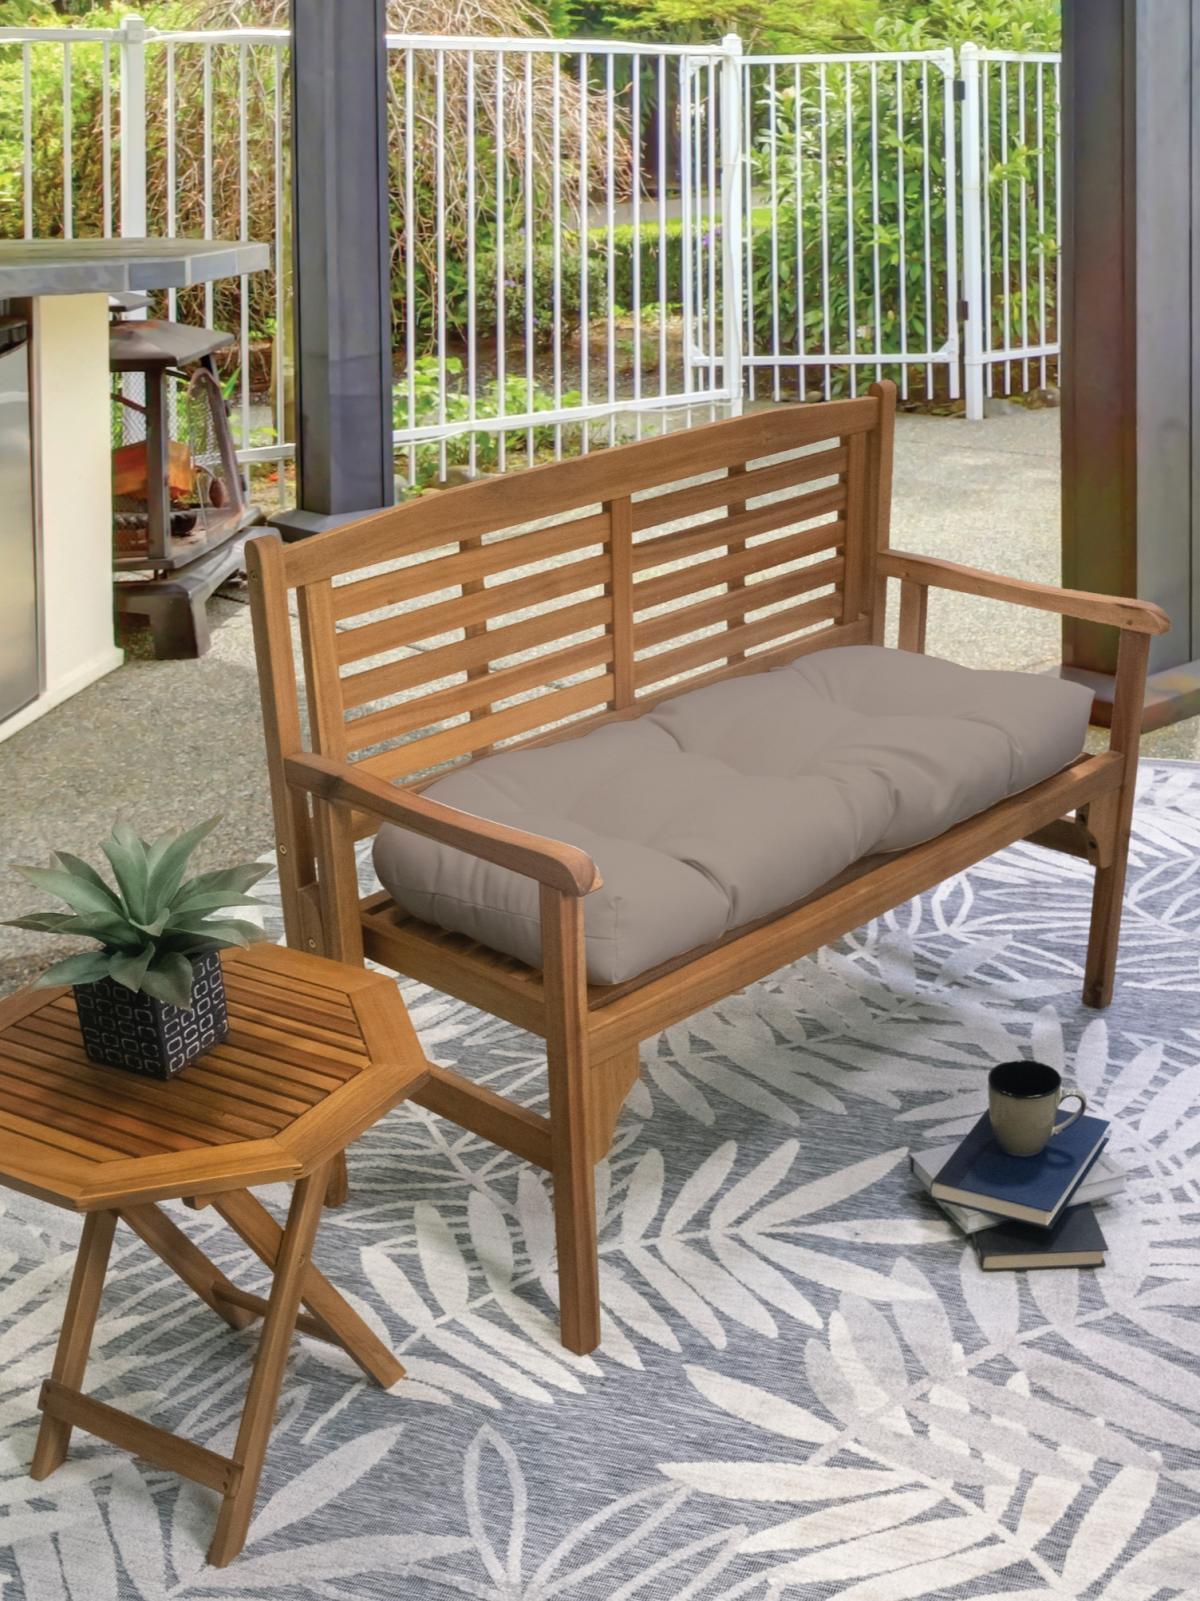 Outdoor Products Page Image - Cropped